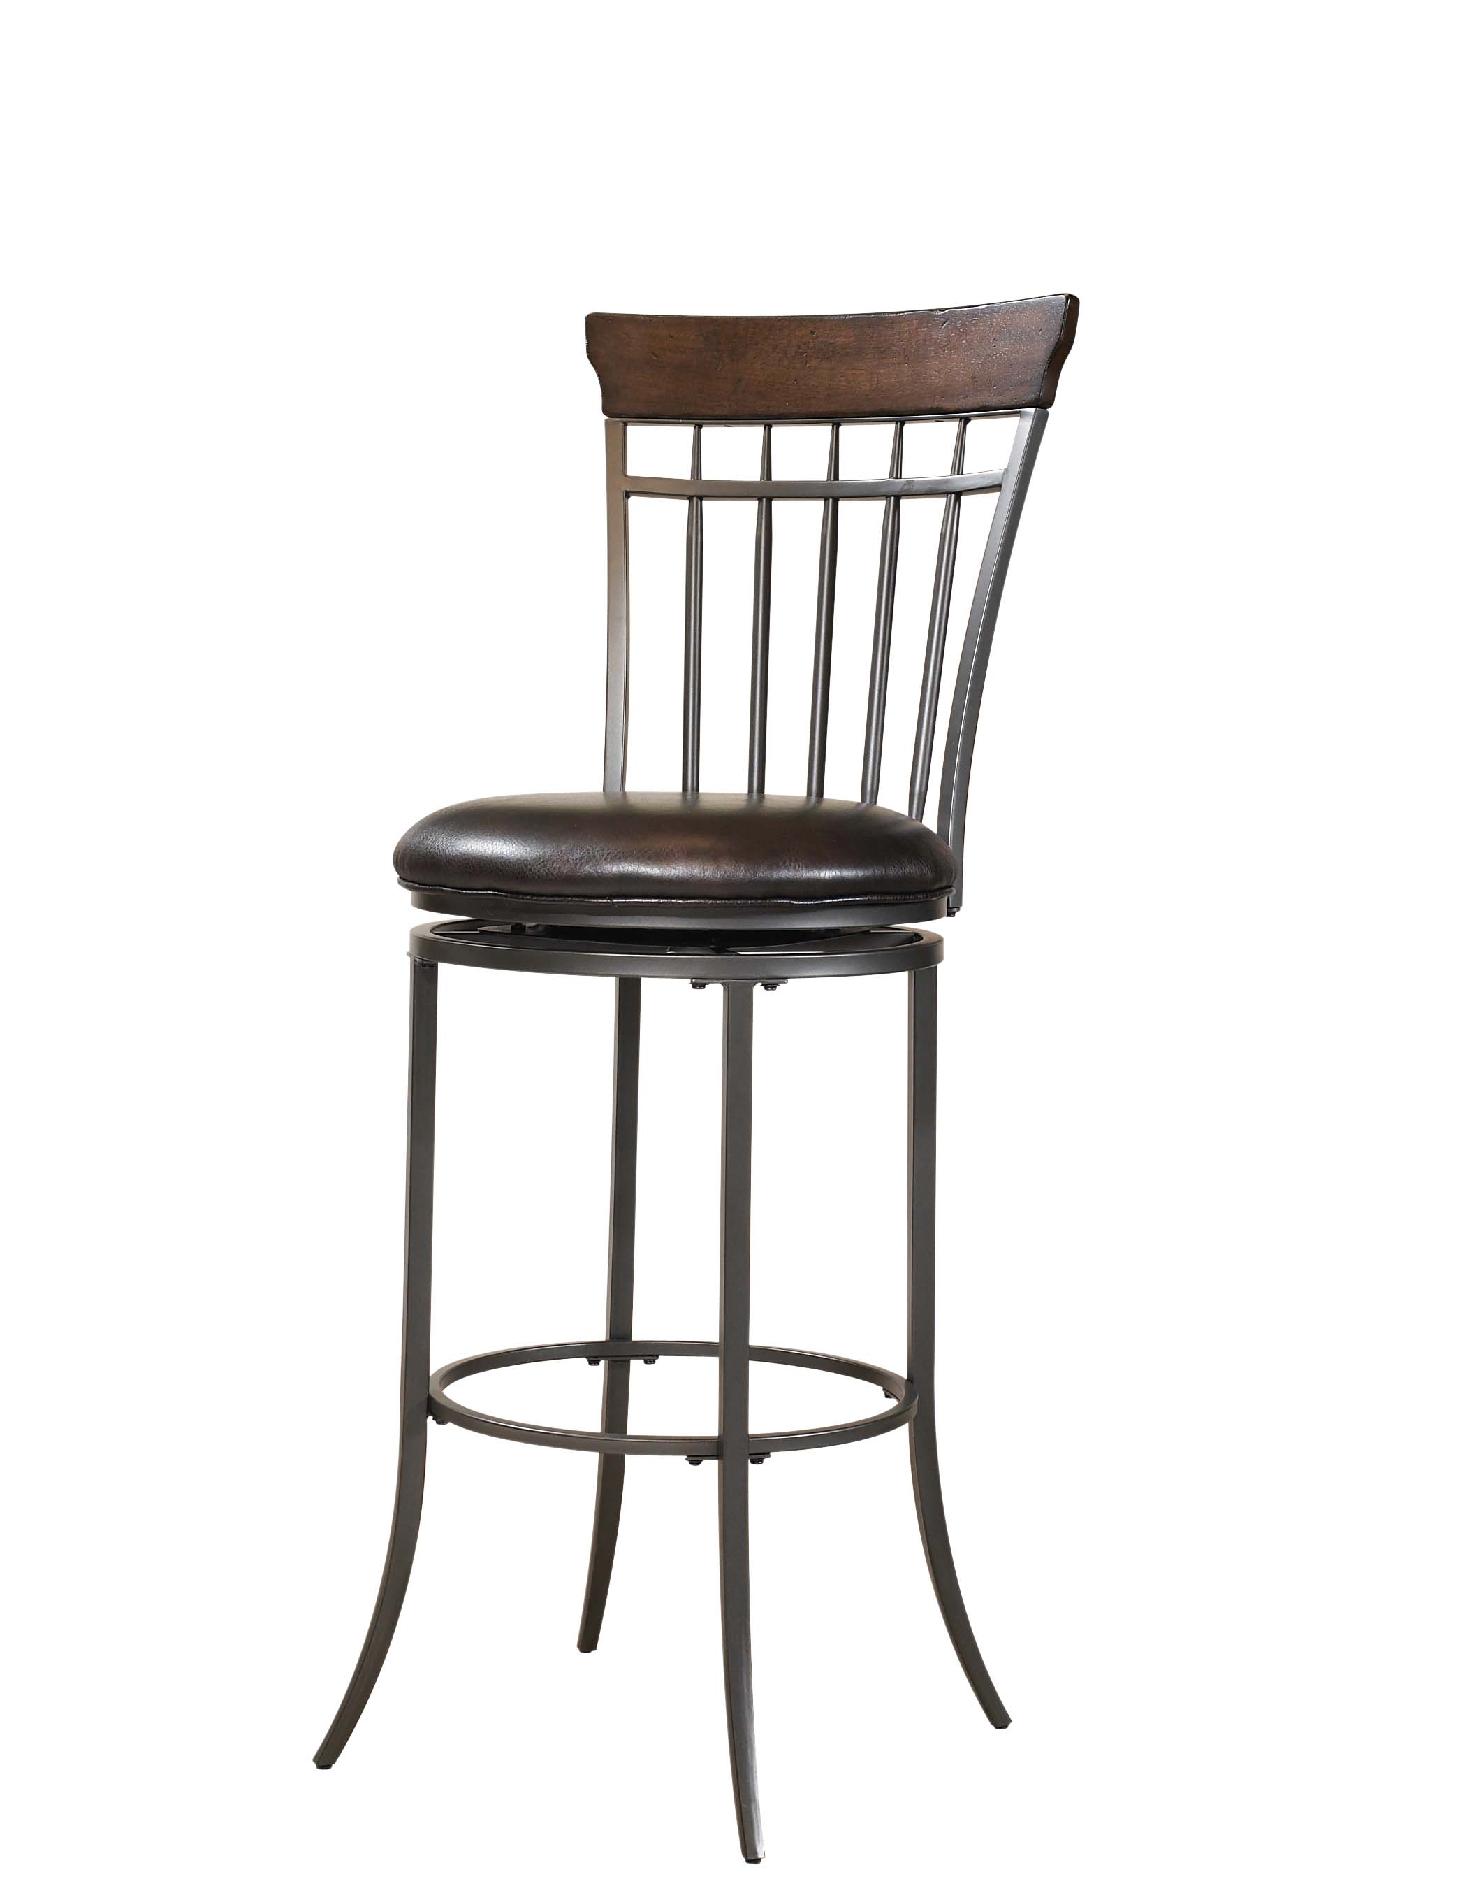 Hillsdale Cameron Swivel Spindle Back Counter Stool